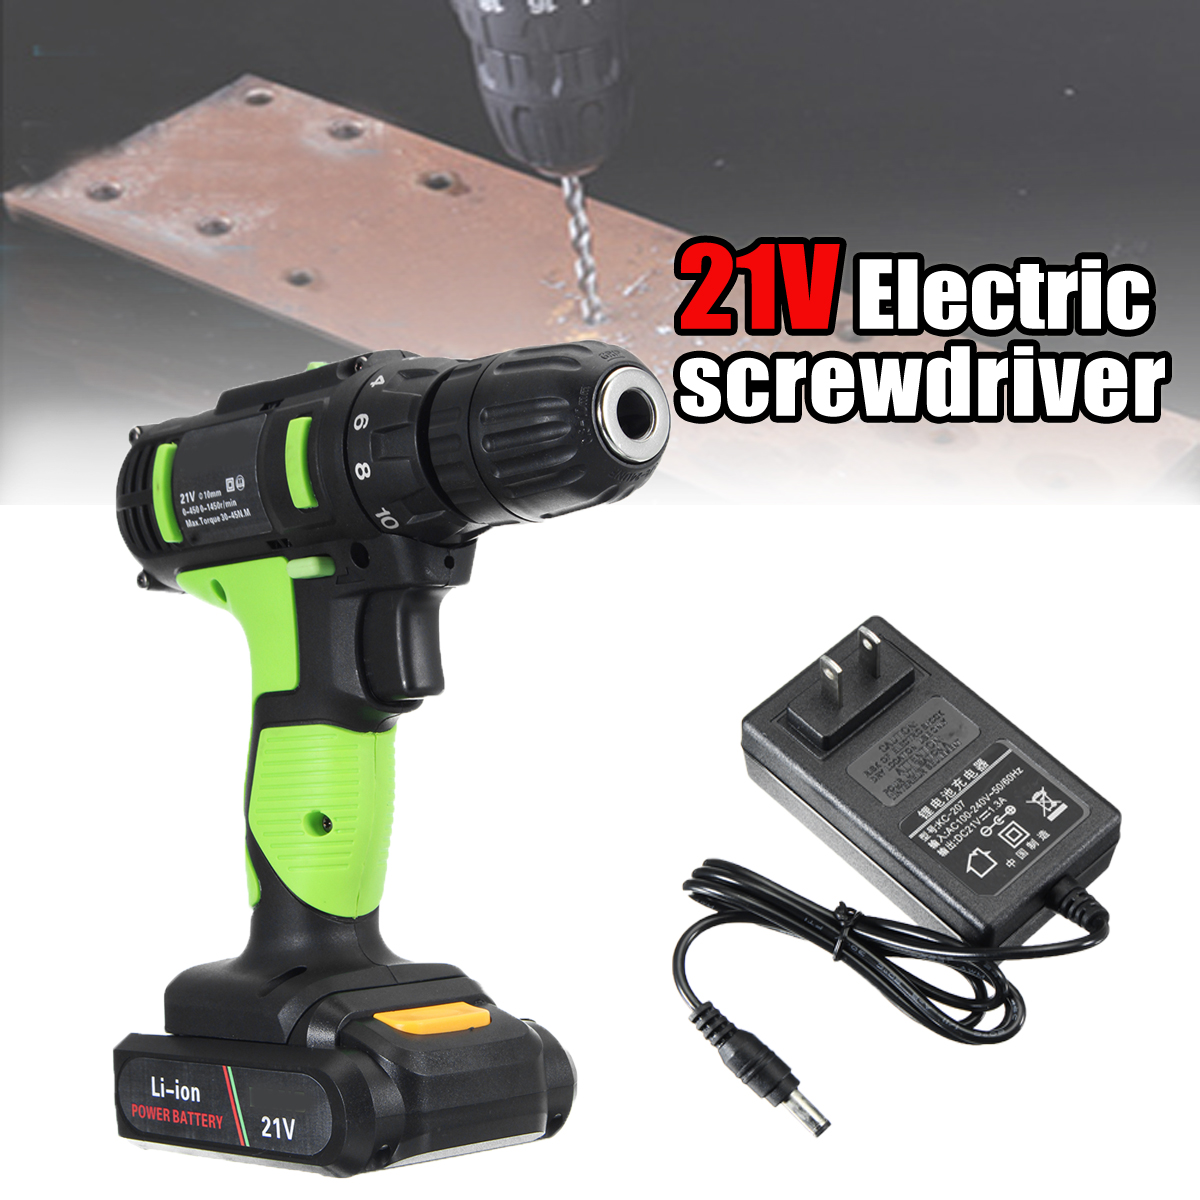 21V-Li-ion-Electric-Screwdriver-Rechargeable-Electric-Charging-Power-Drill-Two-Speed-30-45Nm-1256491-3